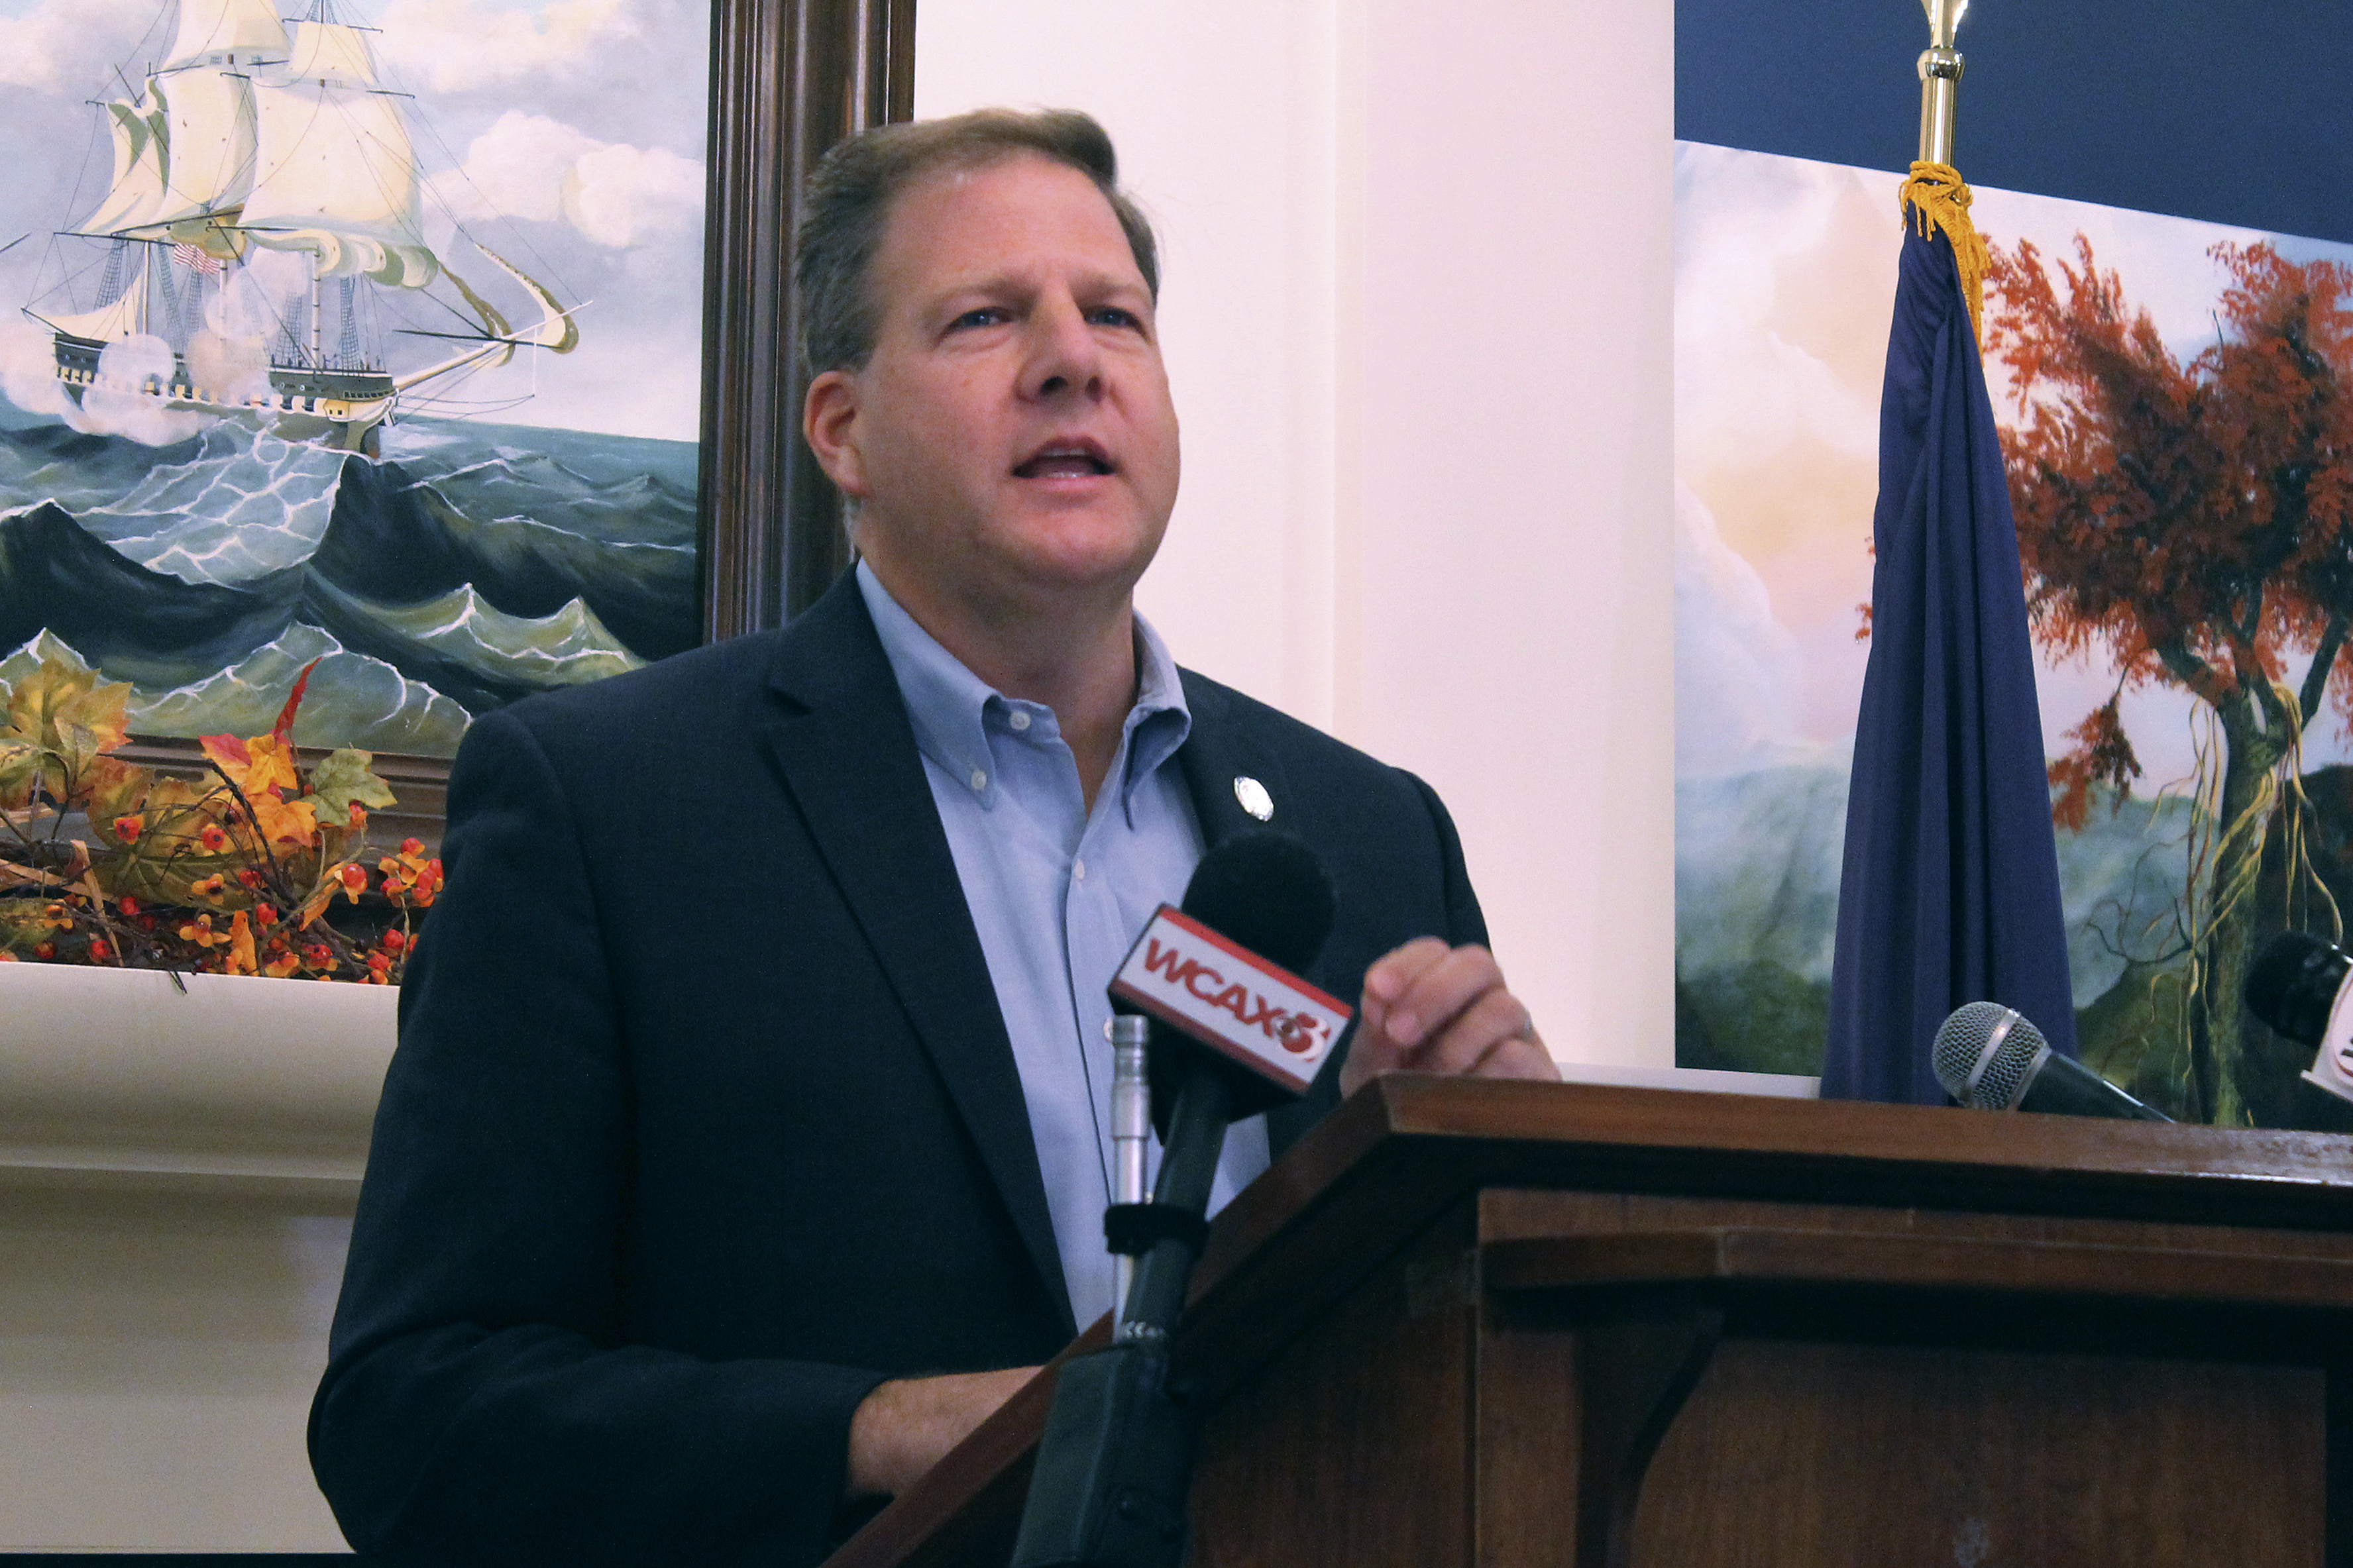 Governor Sununu Denounces Offer to Pay 0 to Person who Caught Teacher Teaching Systemic Racism